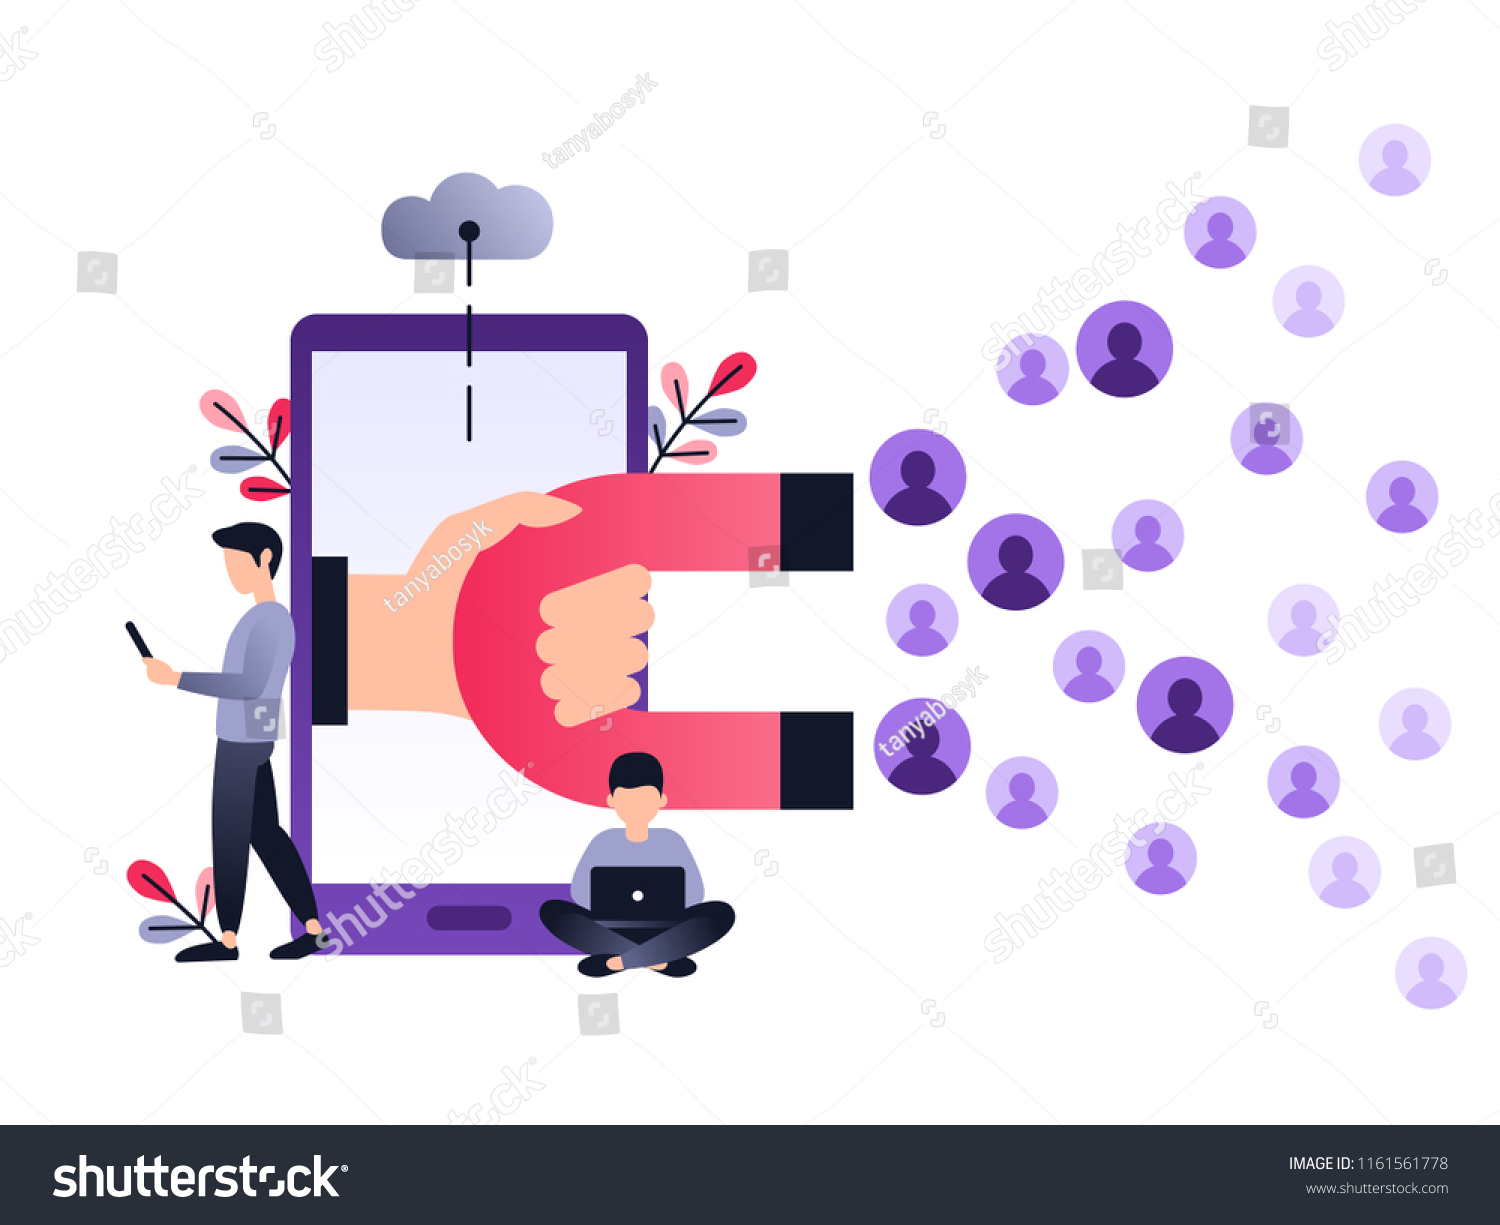 SVG of Social media ultra violet concept vector illustration with magnet engaging followers and likes. Inbound marketing or customer retention strategy. Small people with laptop and smartphone. svg